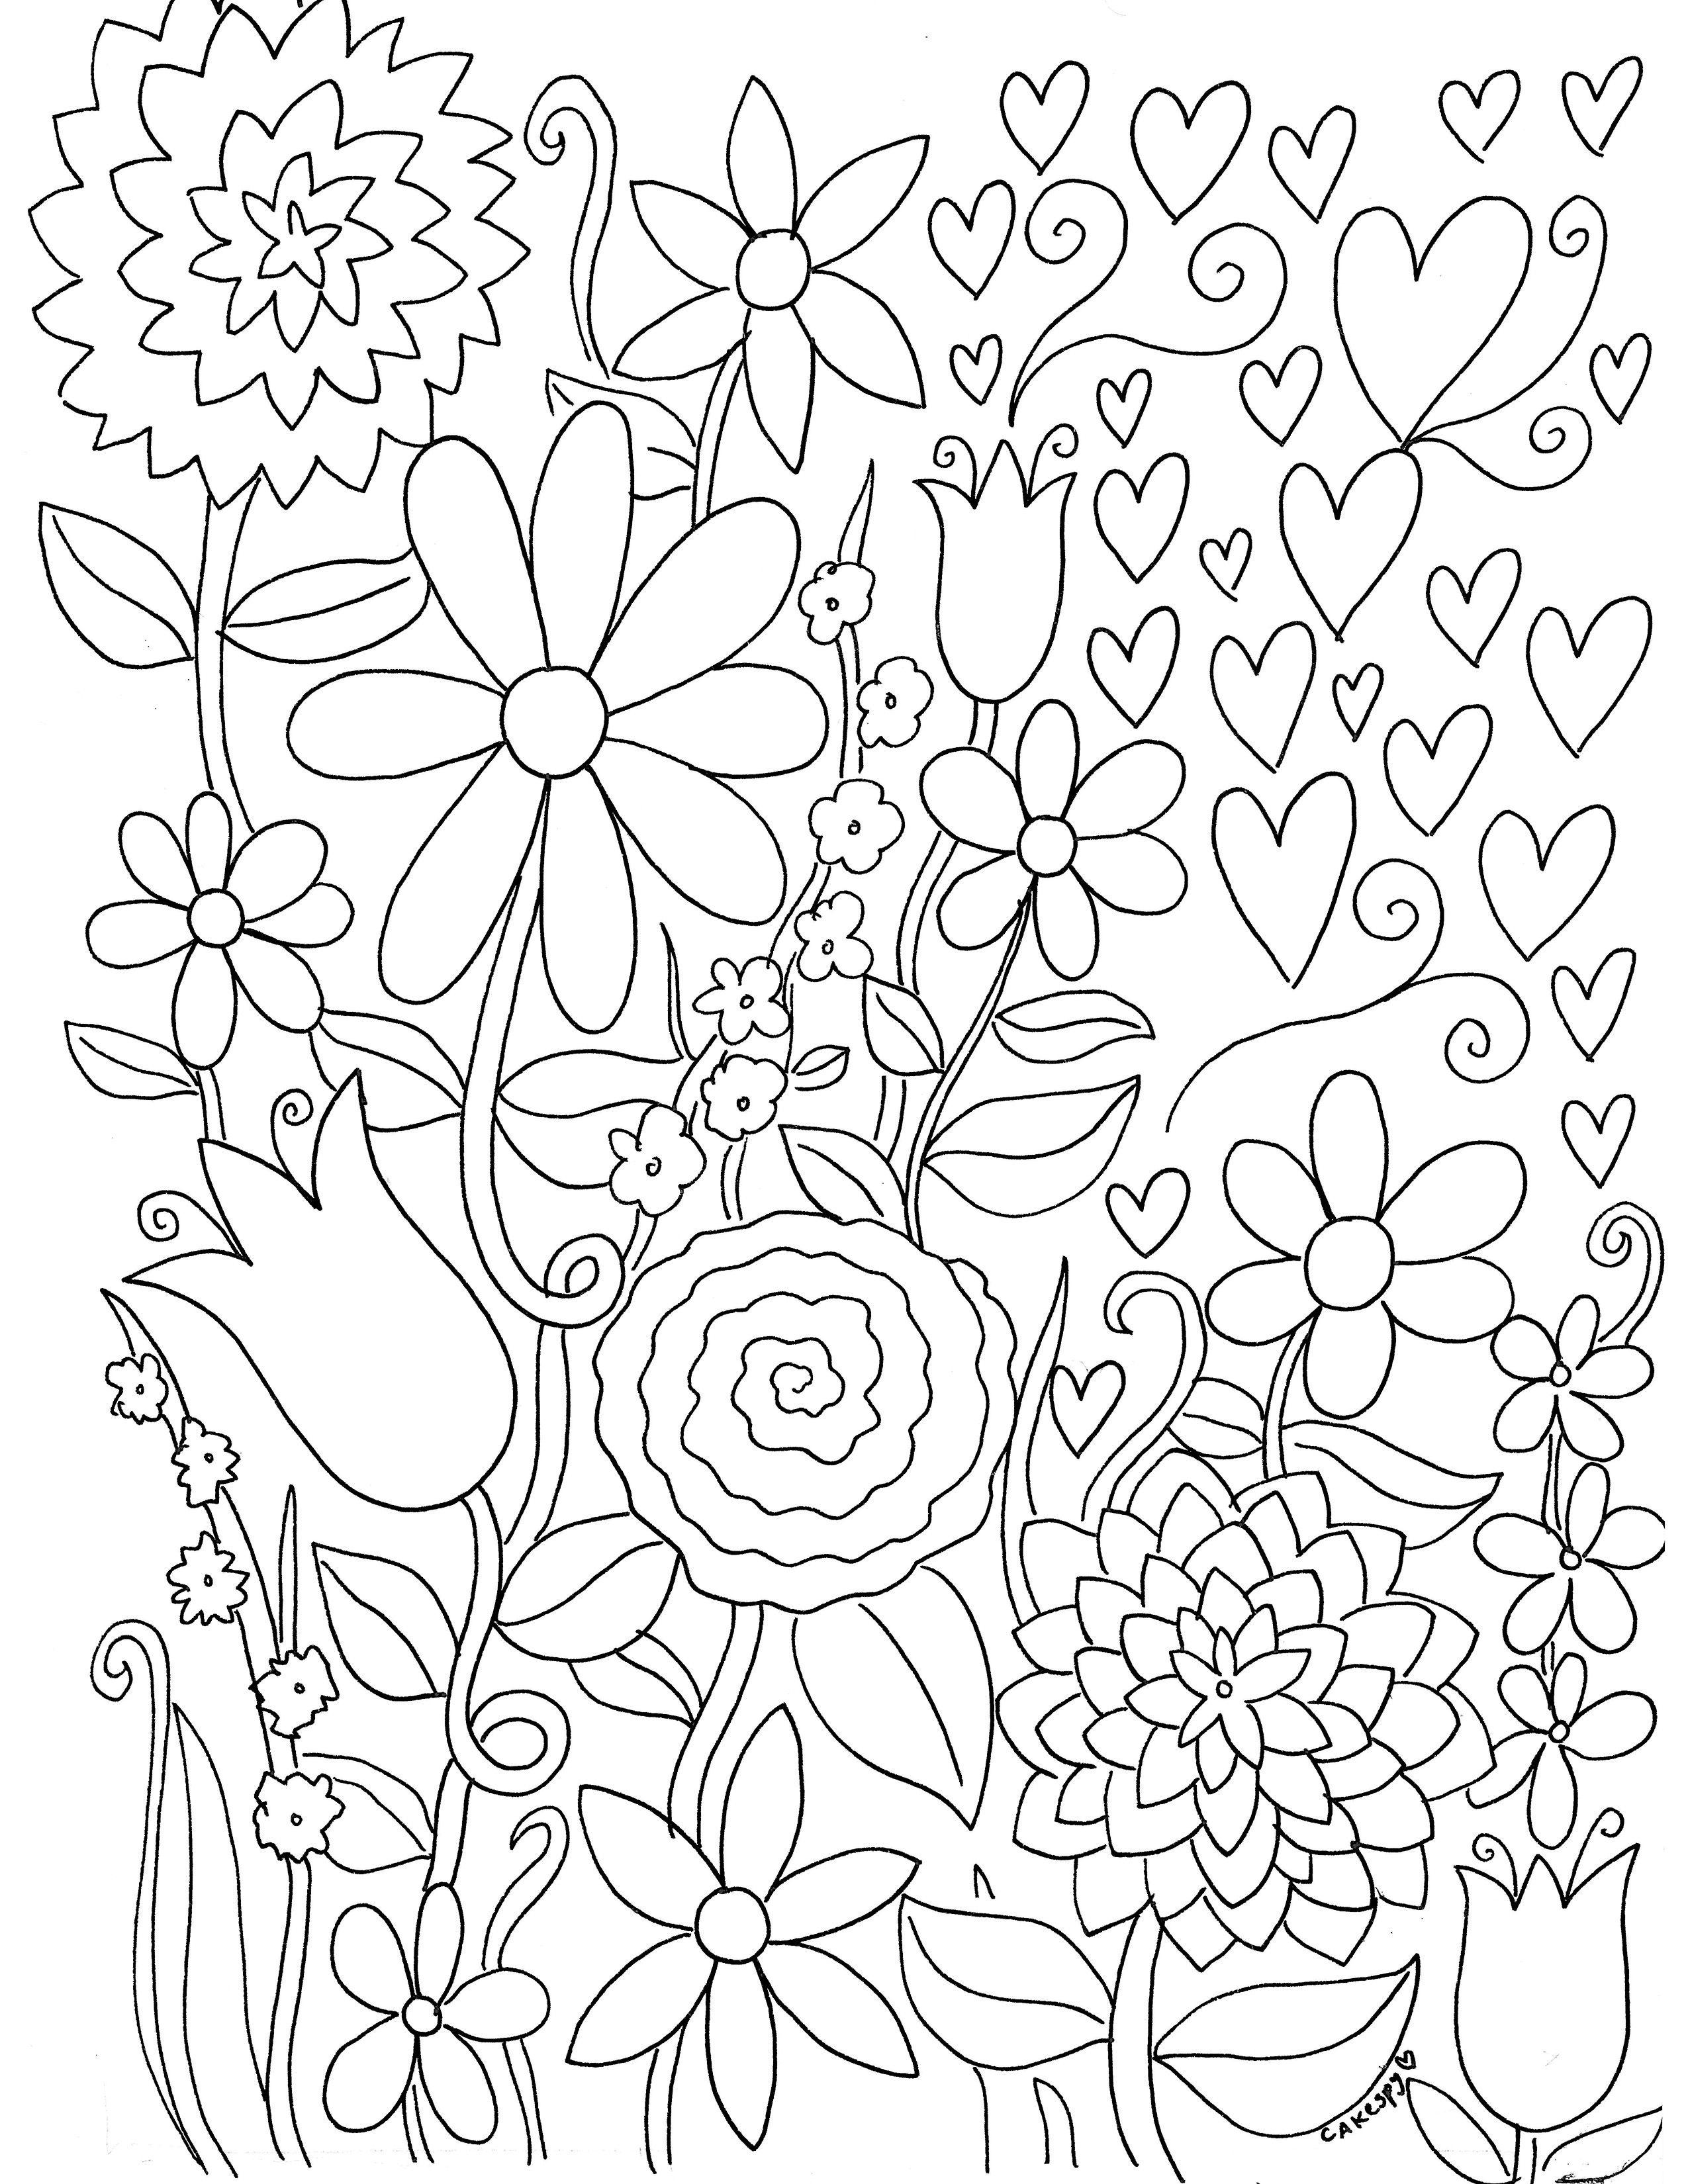 Free Coloring Book Pages For Adults | Coloring Cards | Adult - Free Printable Coloring Cards For Adults